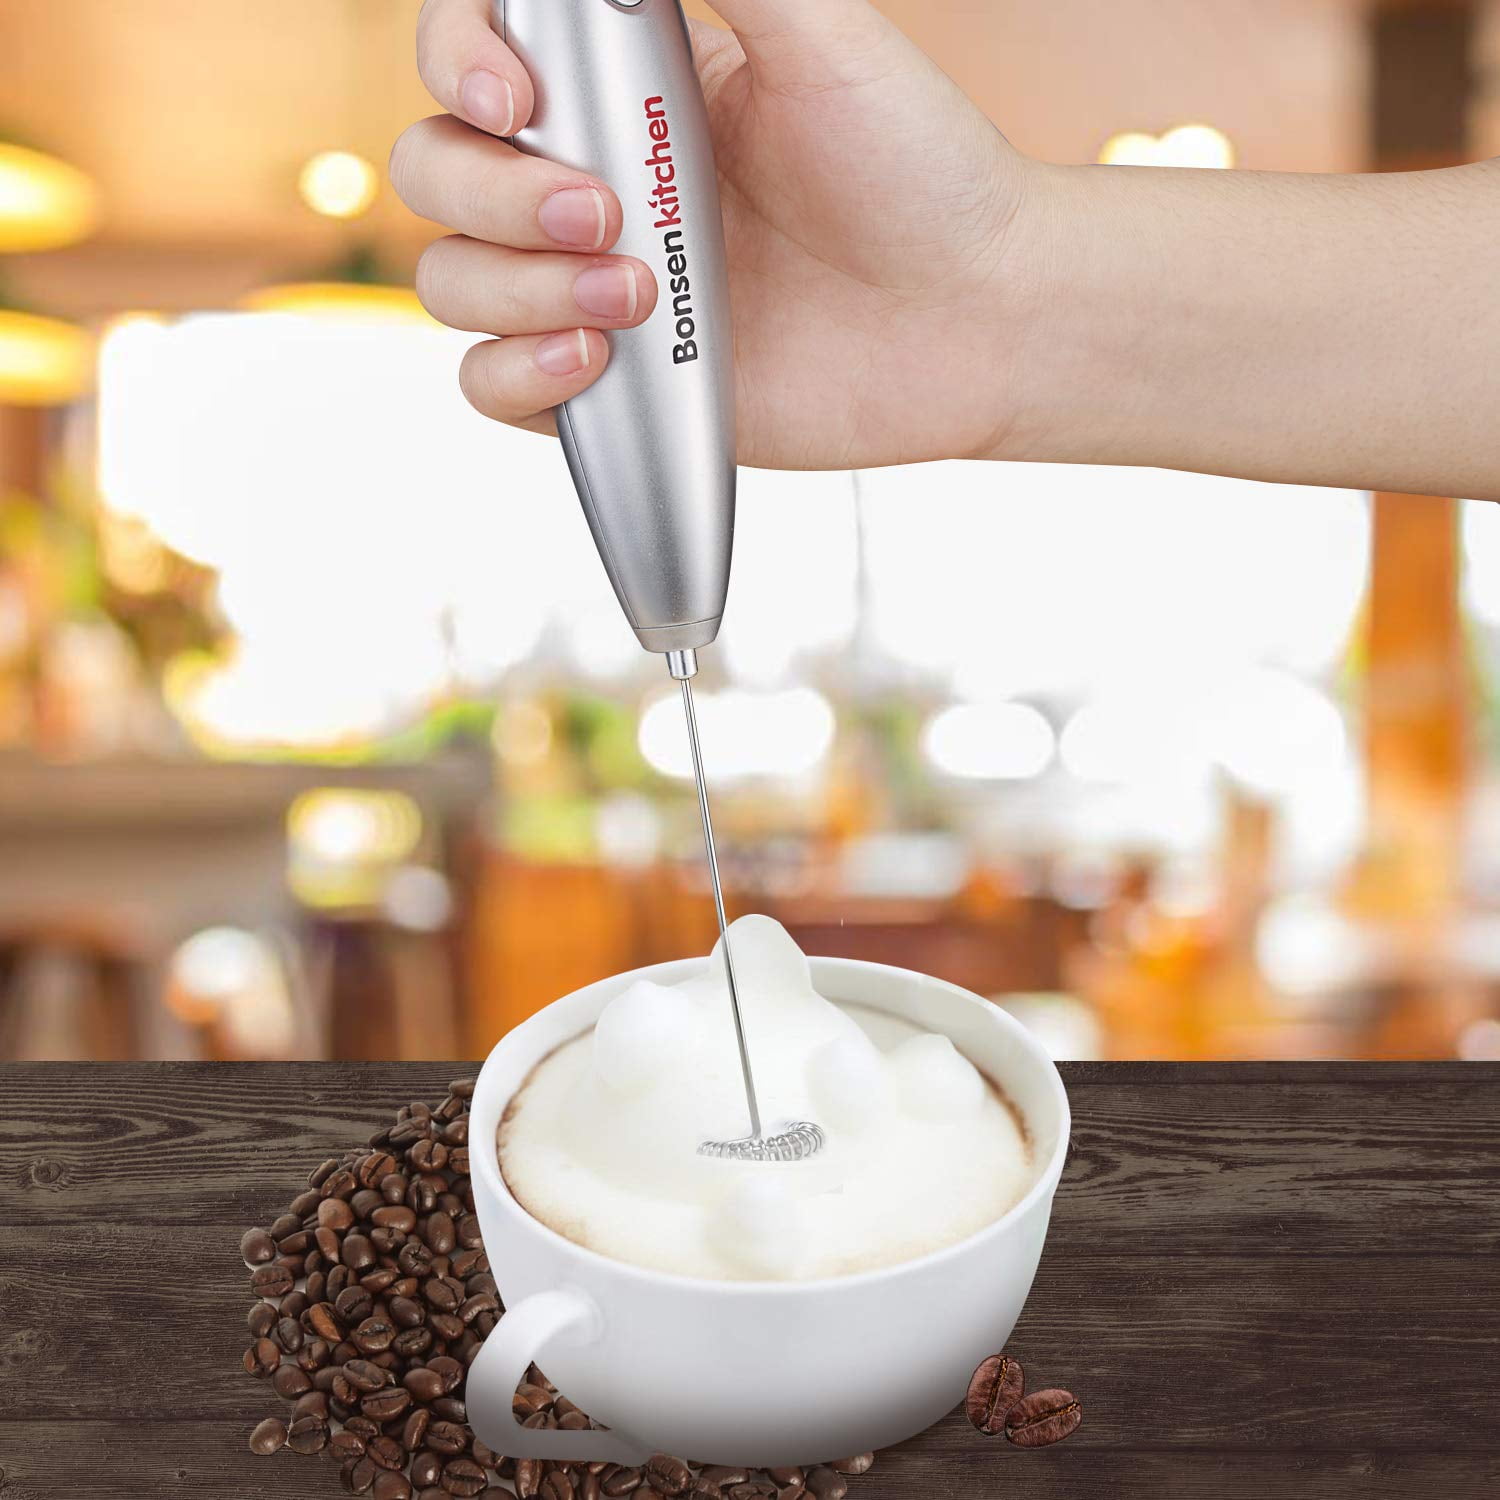 Bonsenkitchen Electric Milk Frother, Automatic Milk Foam Maker, Stainless  Steel Whisk Mini Drink Mixer Blender,Silver 